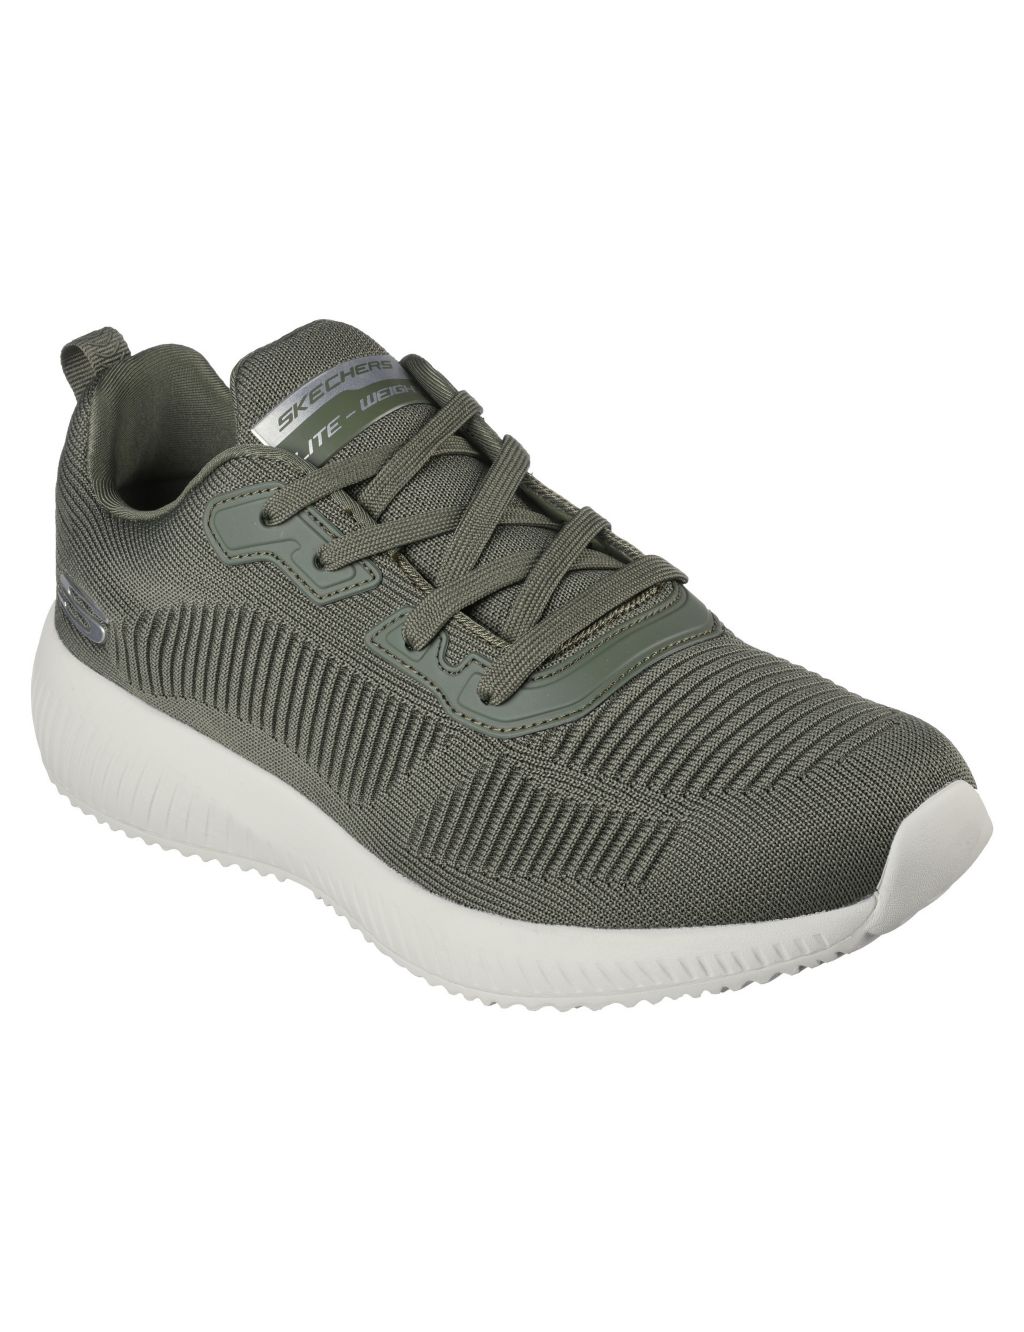 Squad Lace Up Trainers image 2